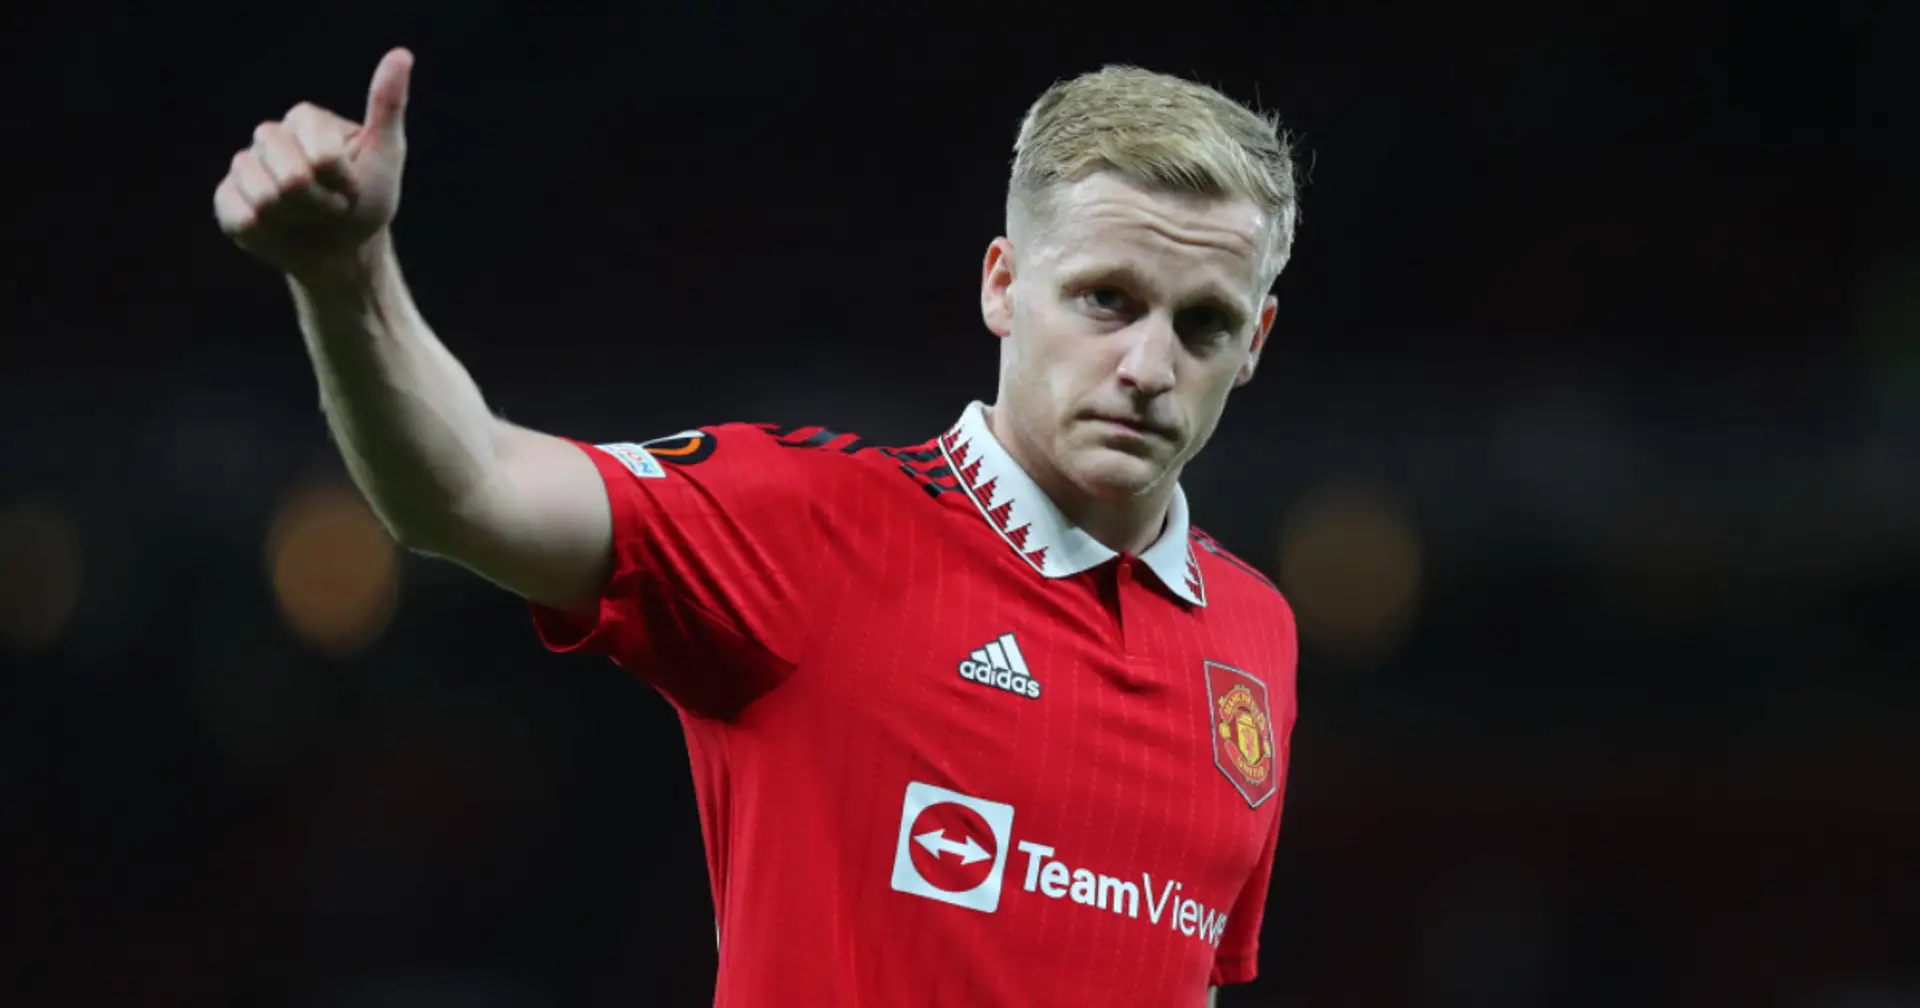 Ajax lead the chase: bookies name favourites to land Donny van de Beek